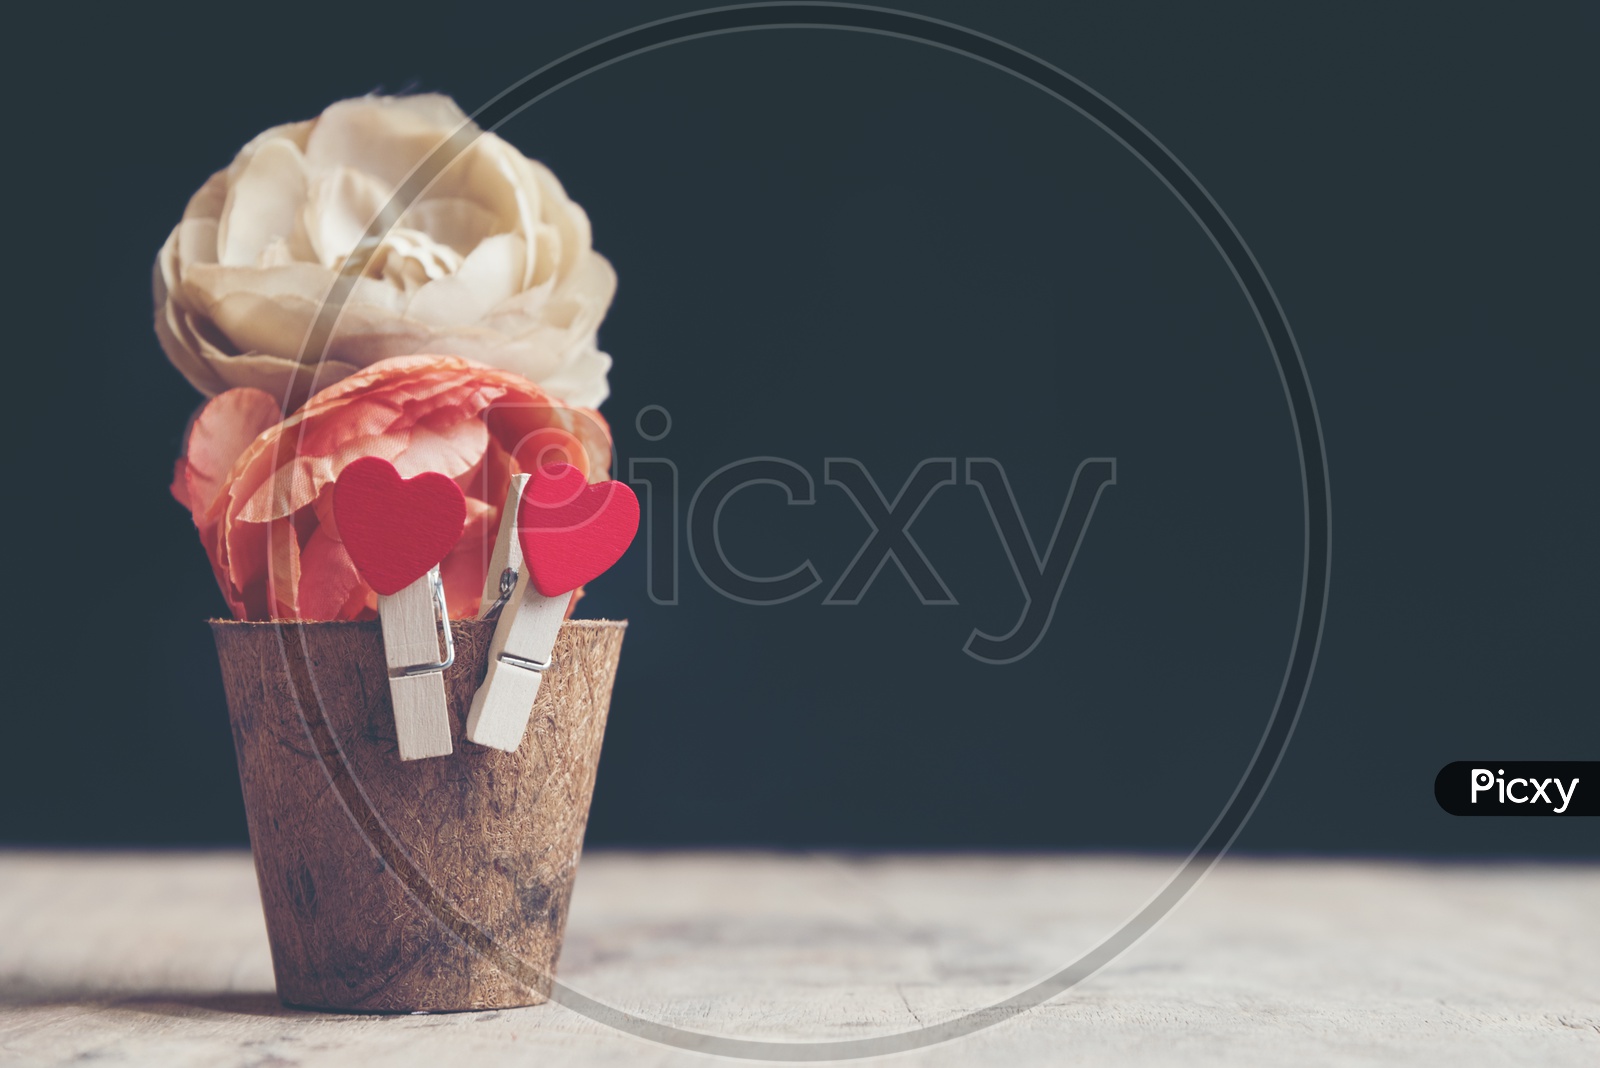 Rose flowers in a wooden cup with heart shaped clip